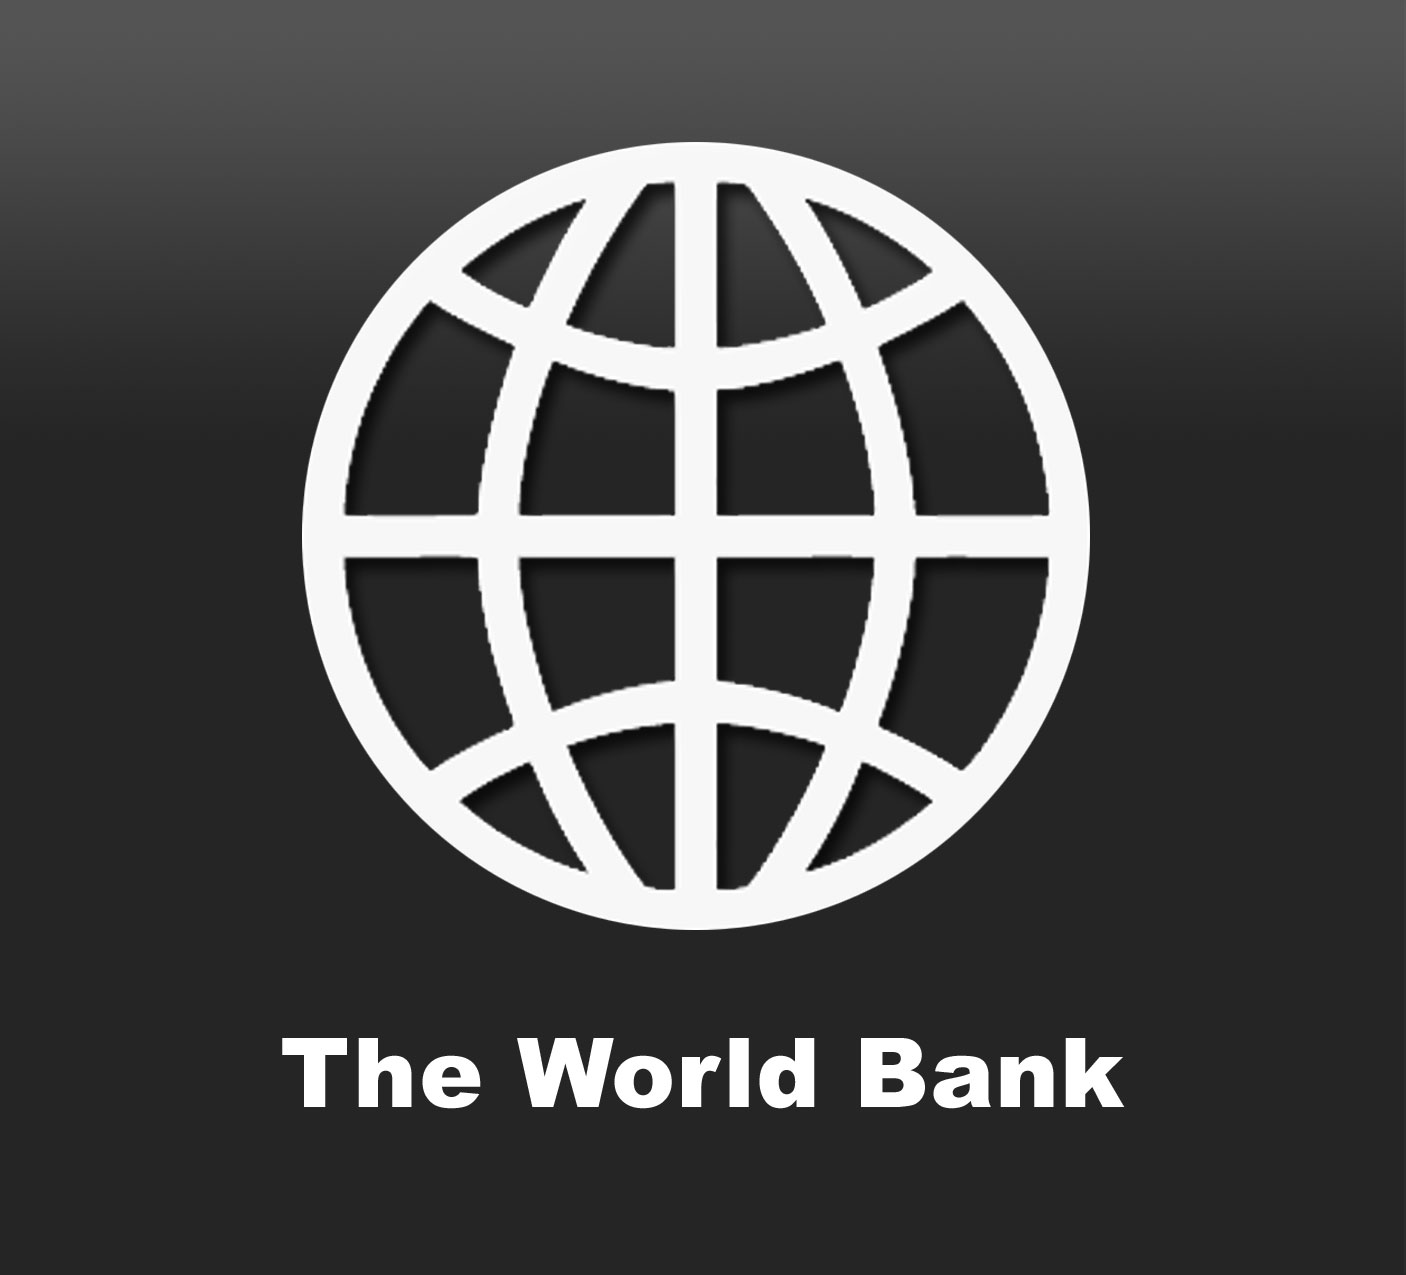 World Bank sees RMG suffering image crisis in global market